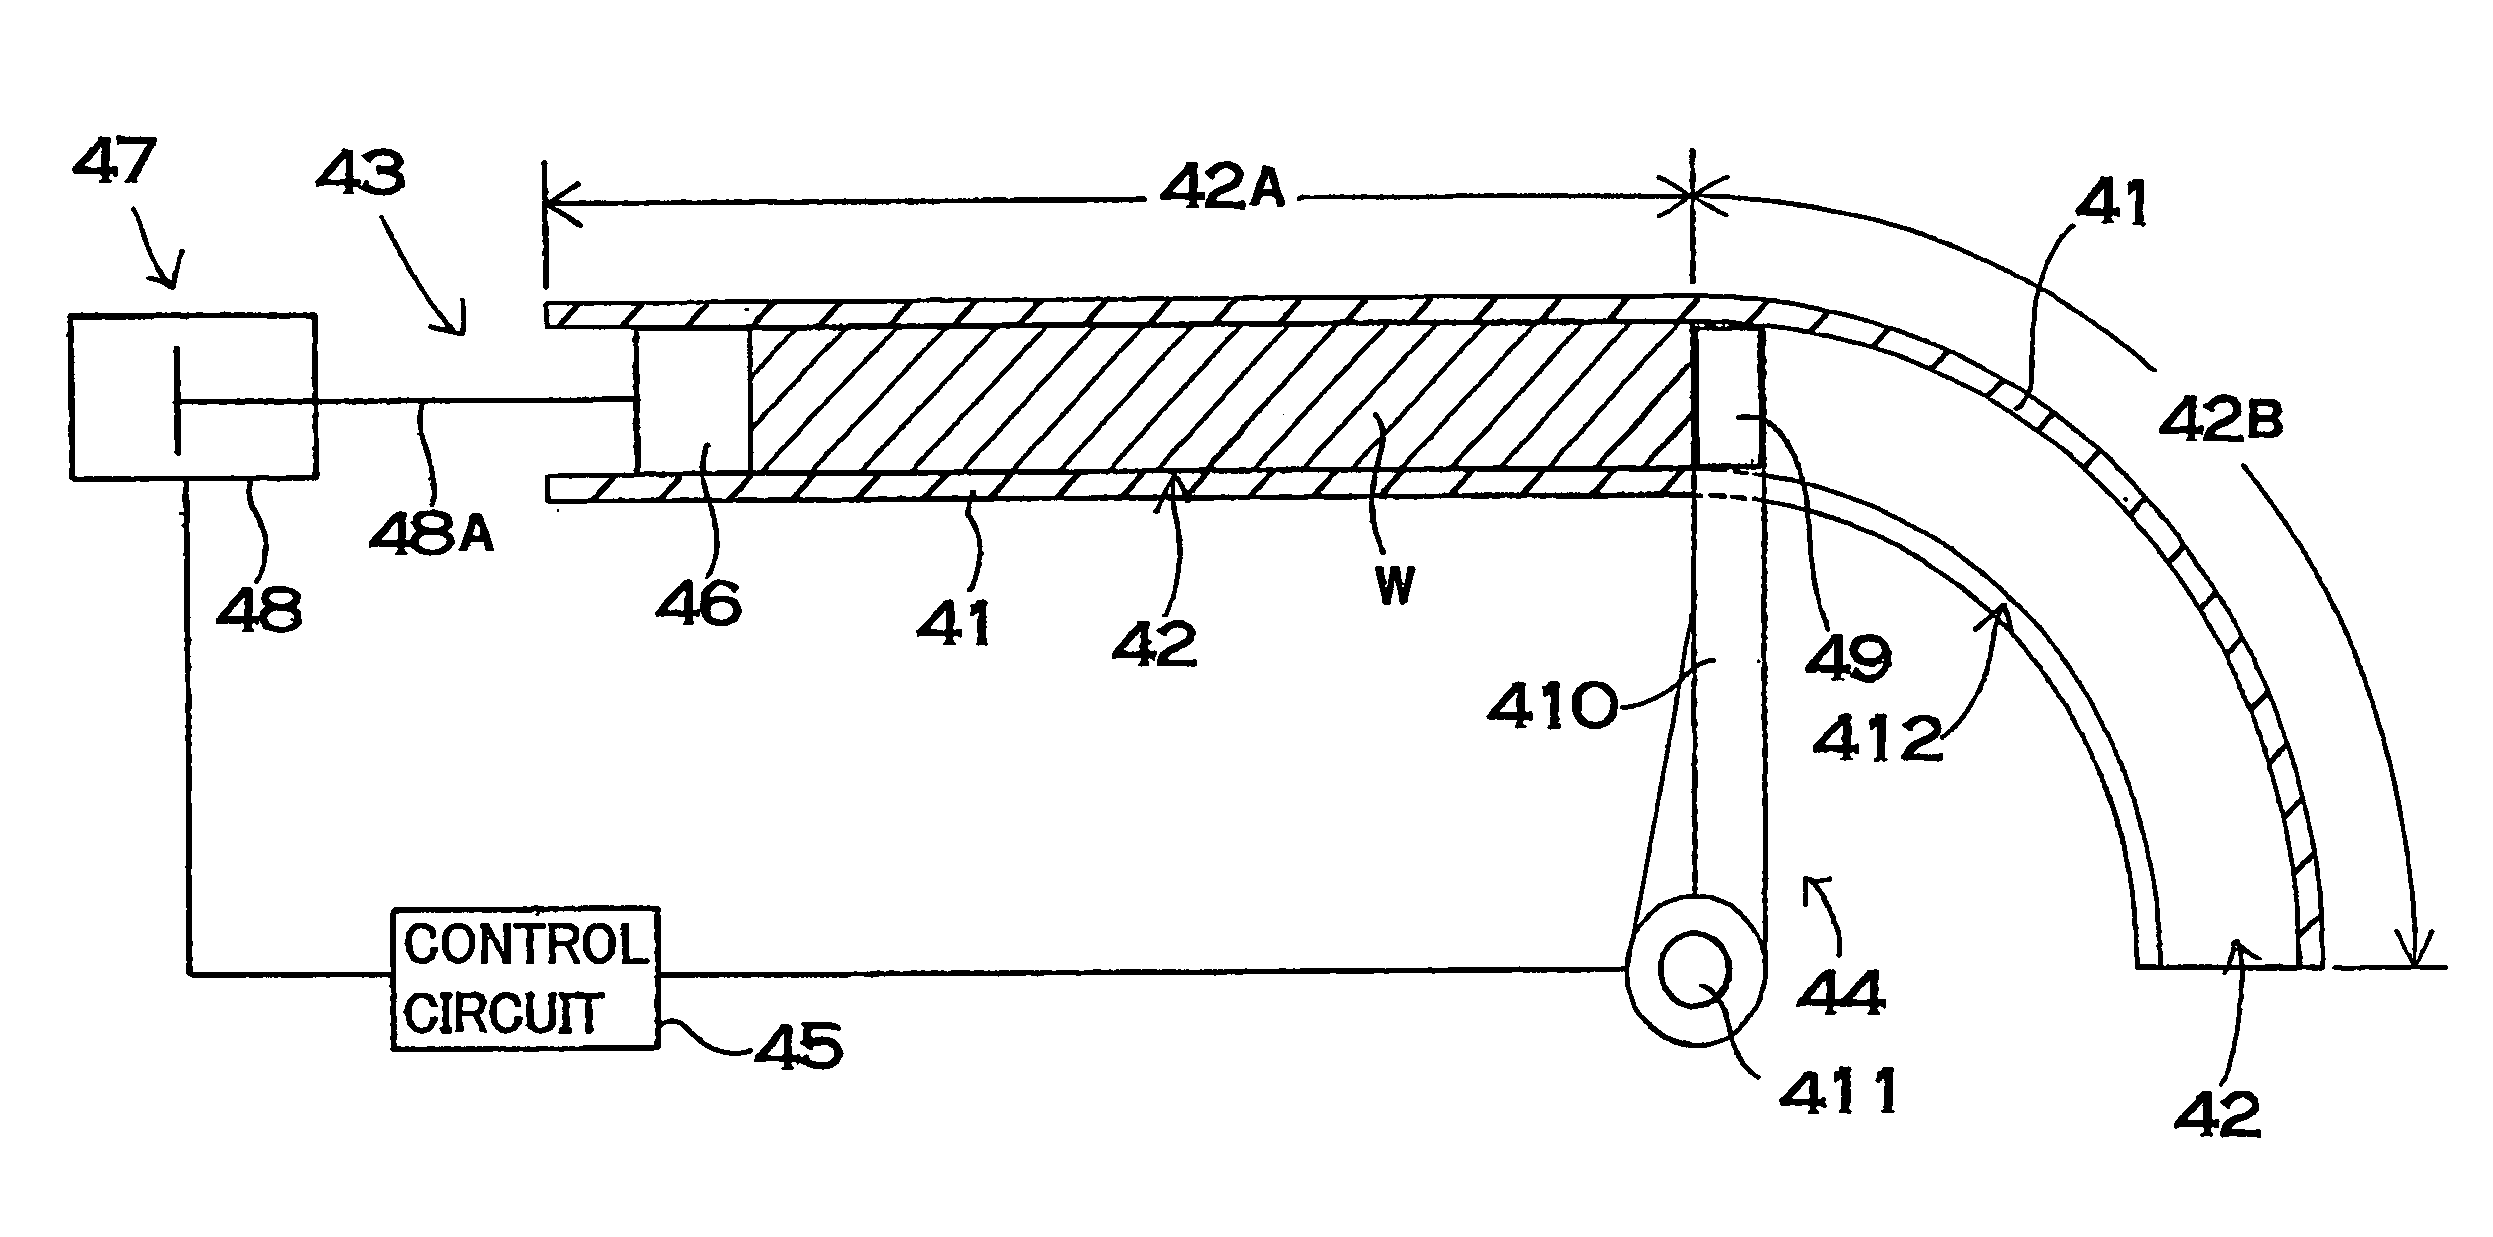 Method of bending wood materials and an apparatus for bending wood materials